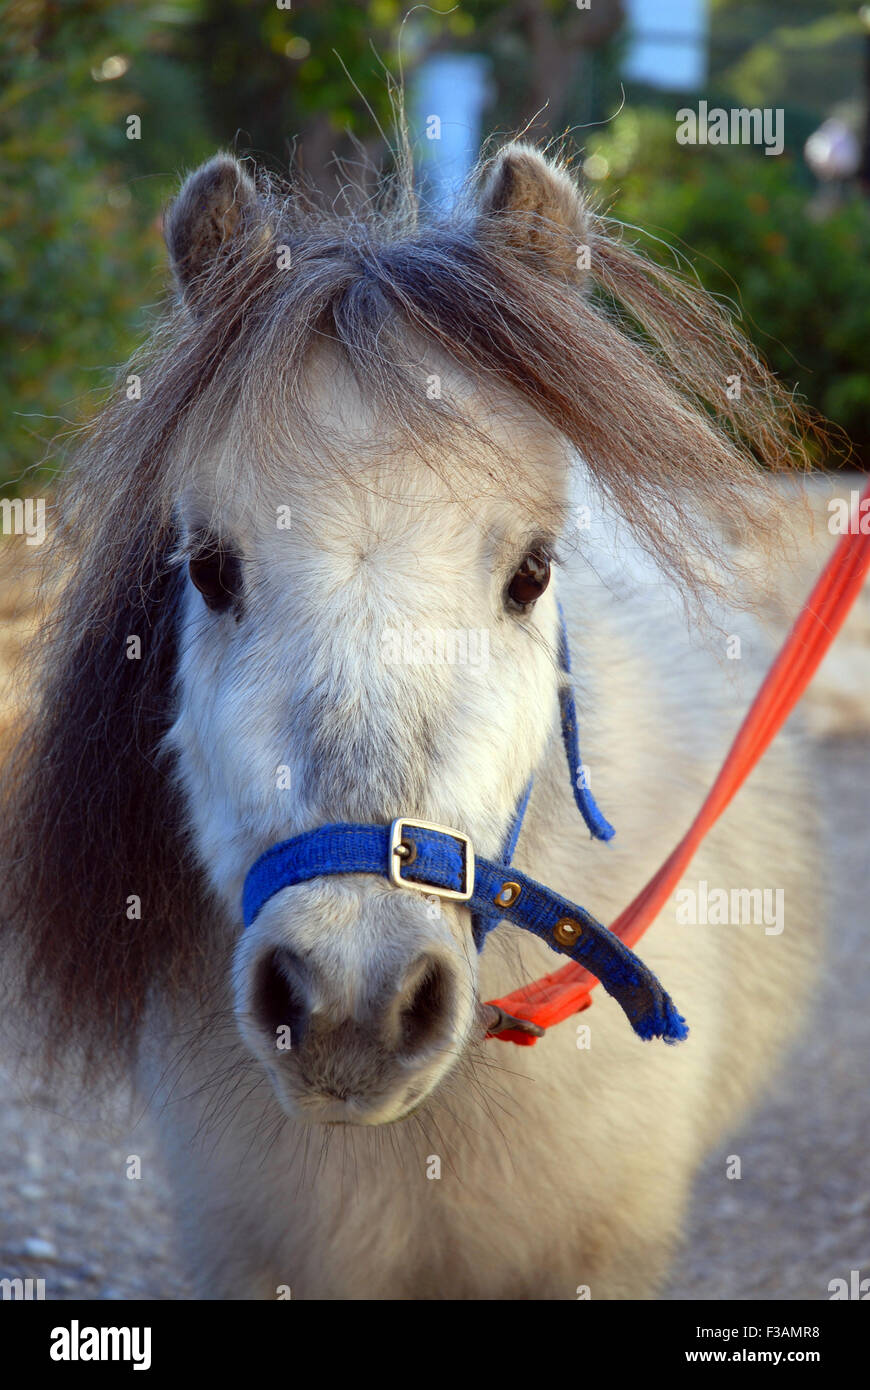 Falabella miniature horse, portrait. The falabella is one of the smallest horse breeds in the world. Stock Photo